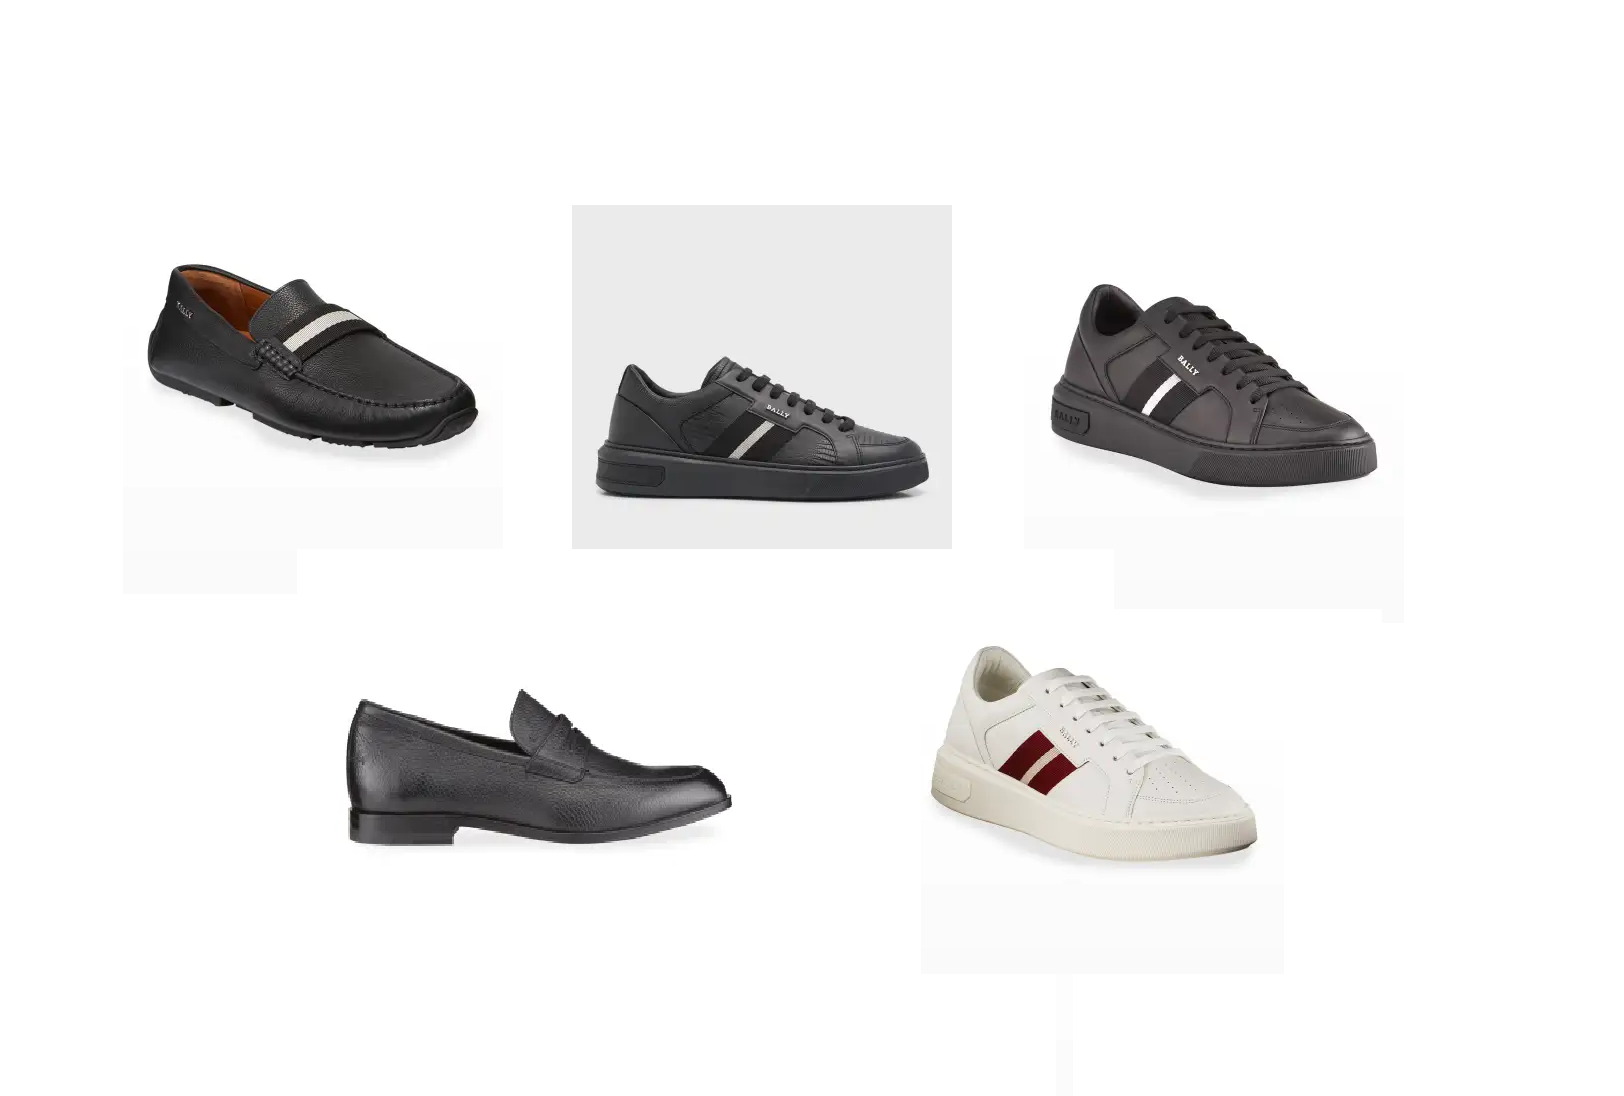 Sale on Bally Mens Bally Shoes 55% off